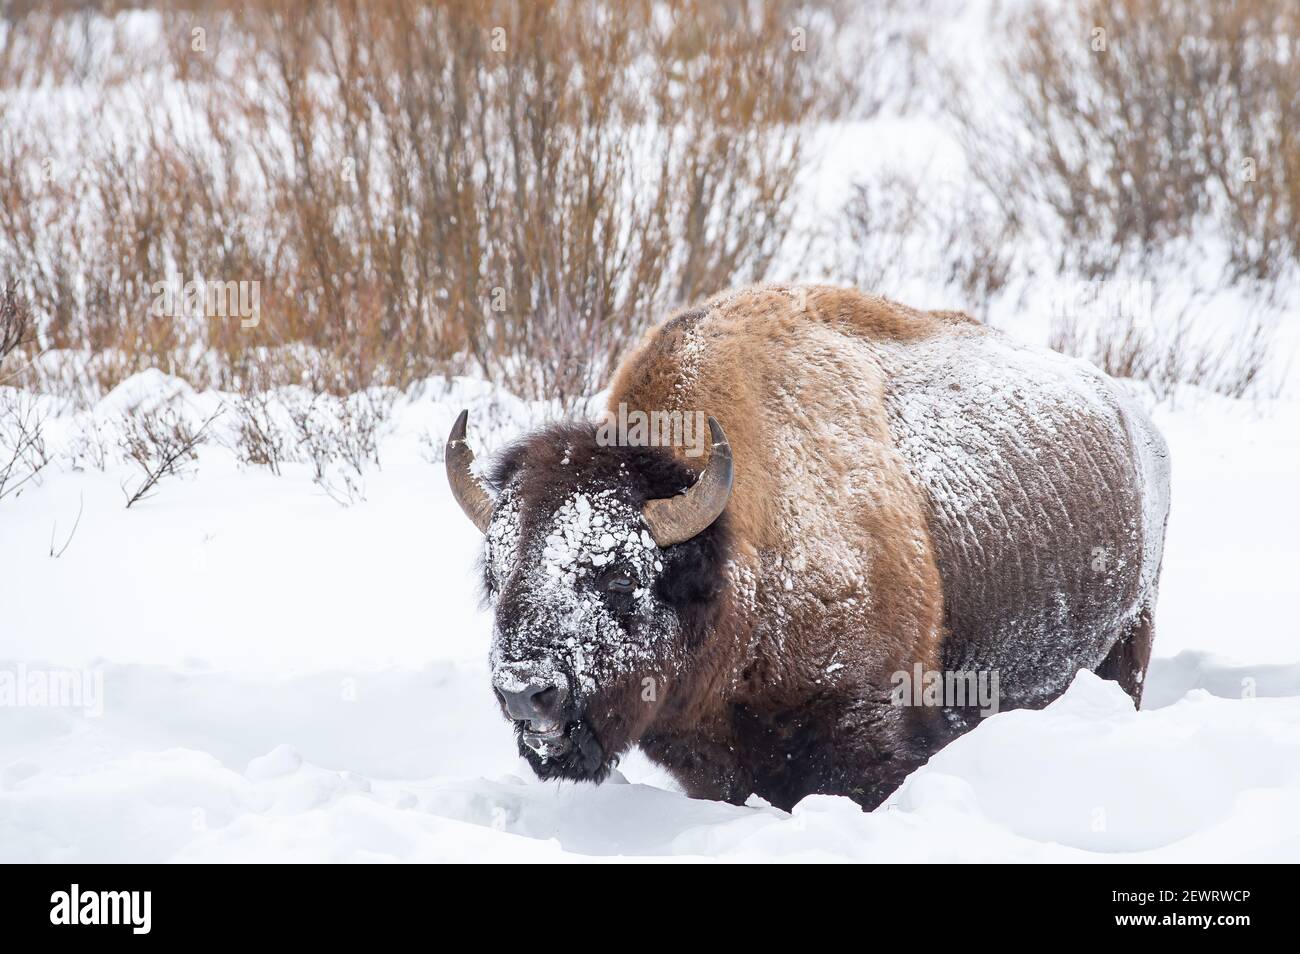 Snow covered bison (Bison bison), Yellowstone National Park, UNESCO World Heritage Site, Wyoming, United States of America, North America Stock Photo